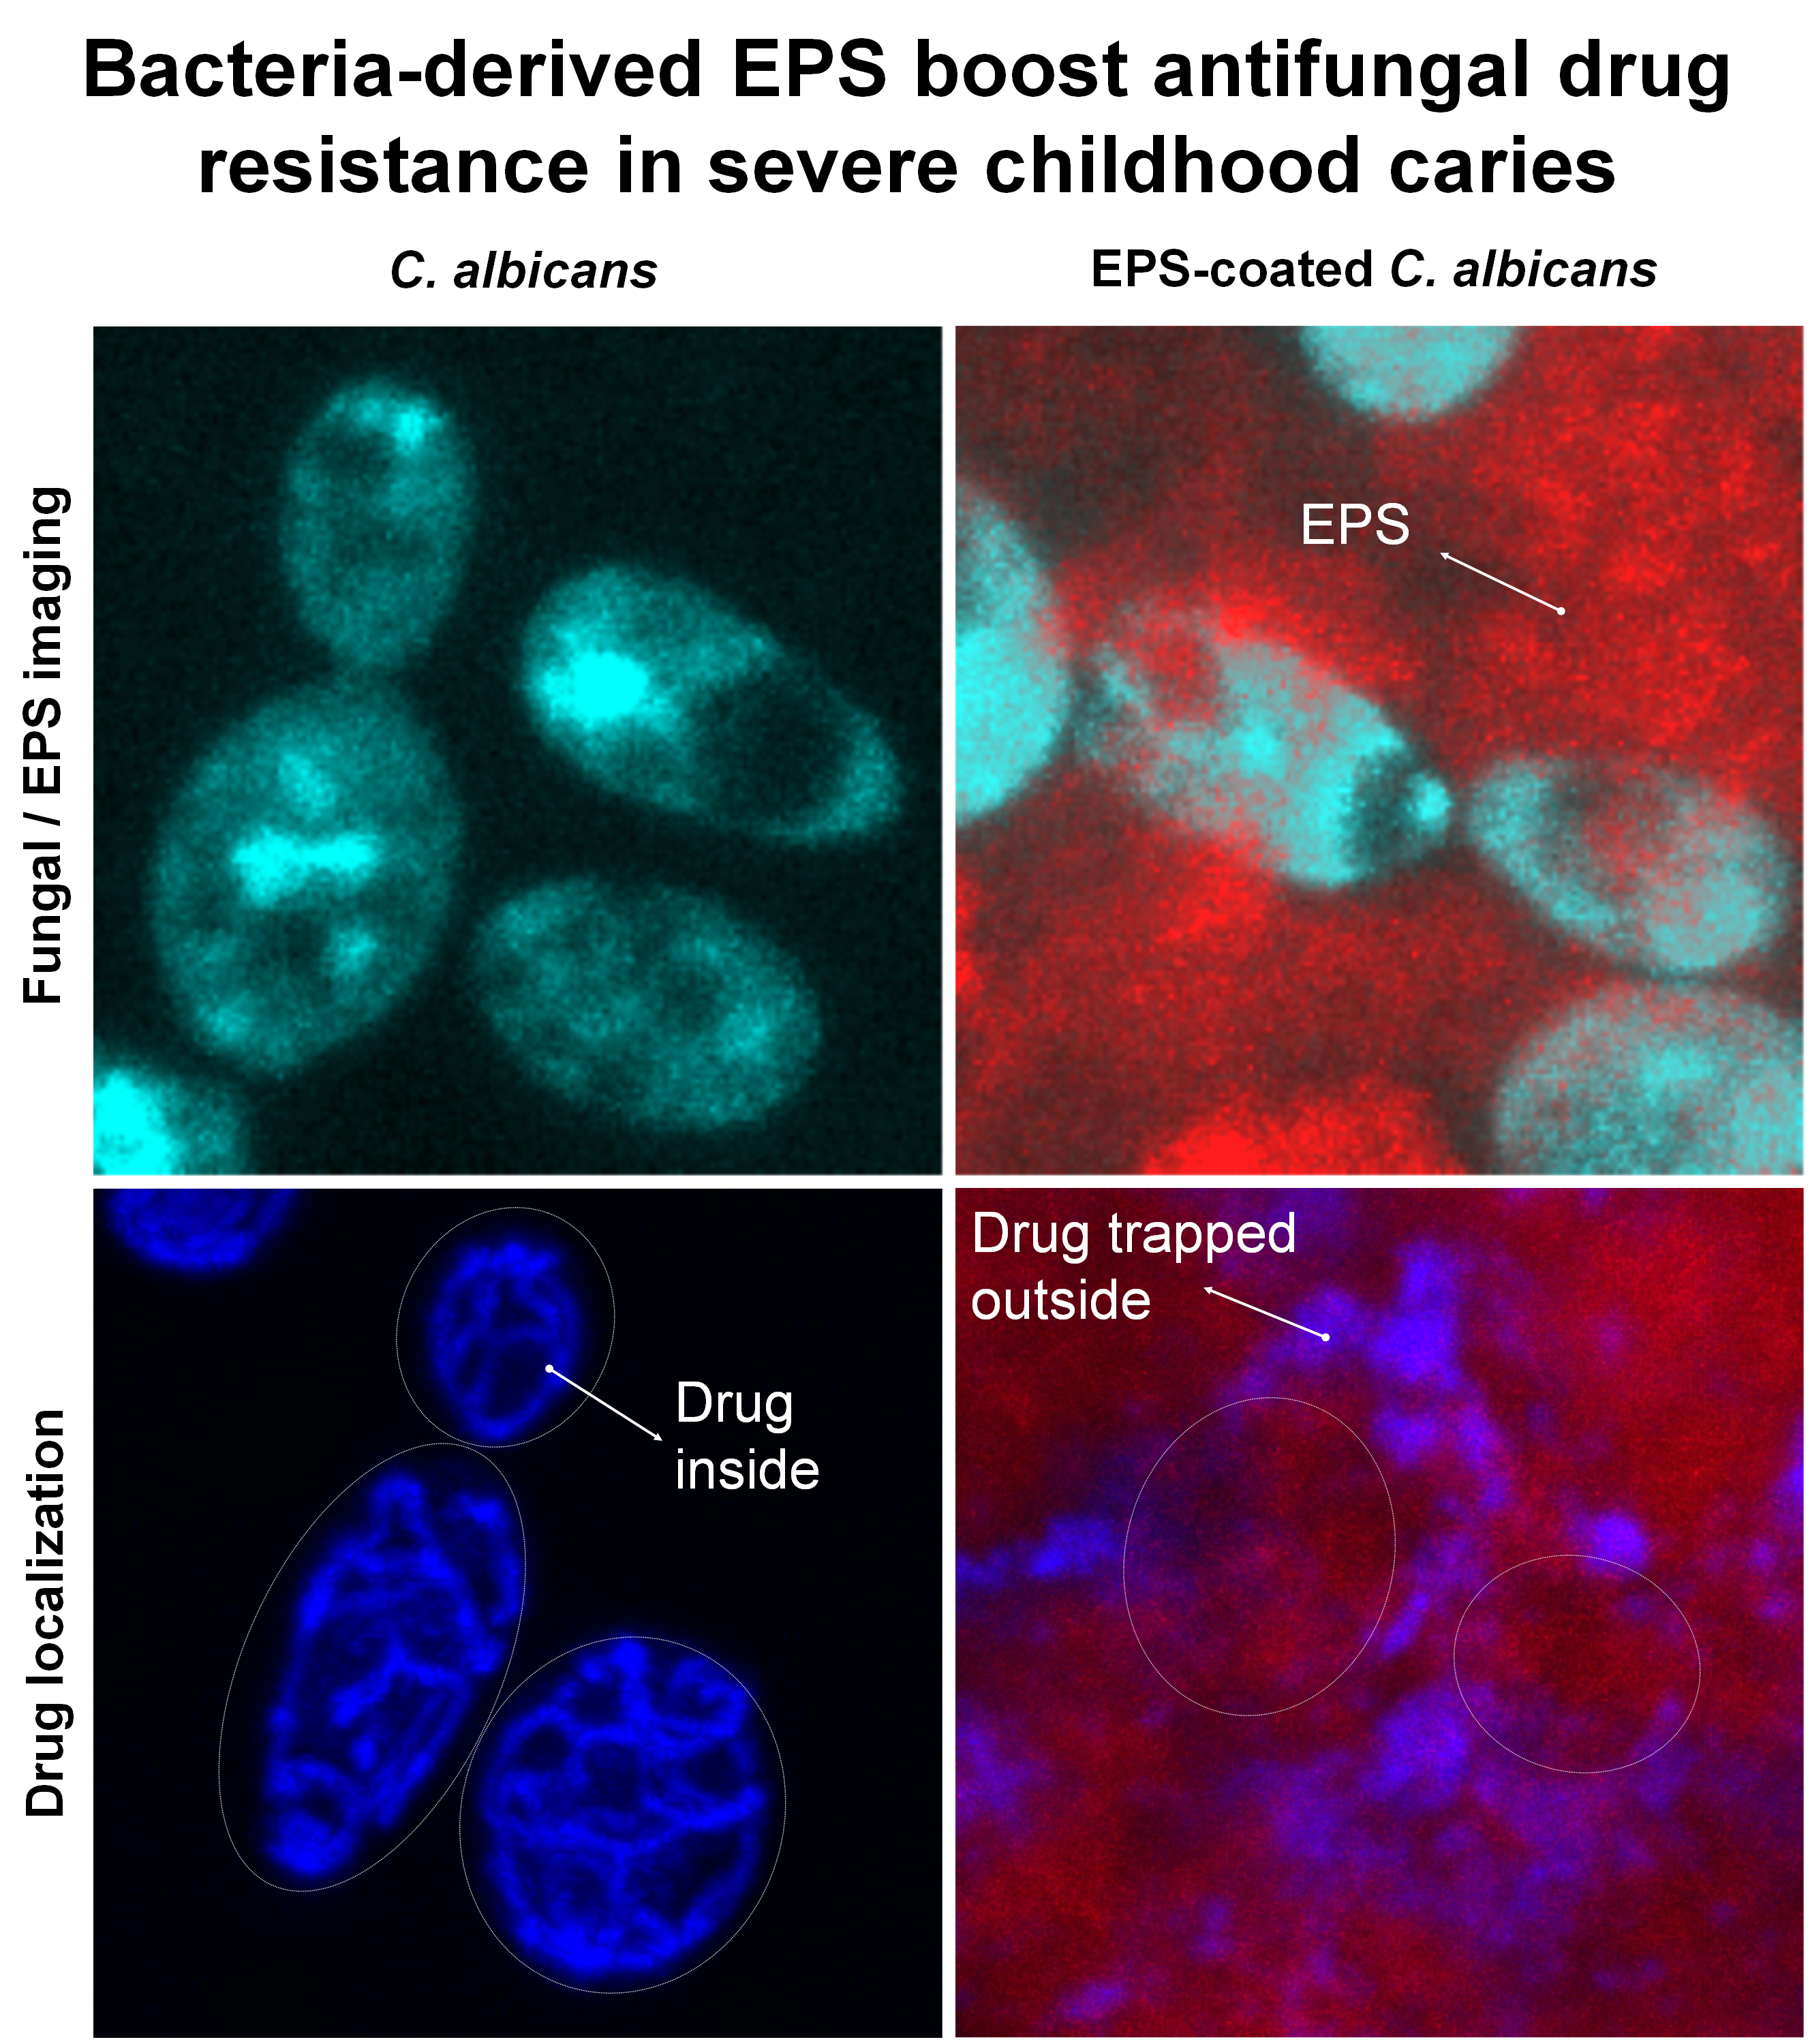 Bacteria-derived EPS boost antifungal drug resistance in severe childhood caries